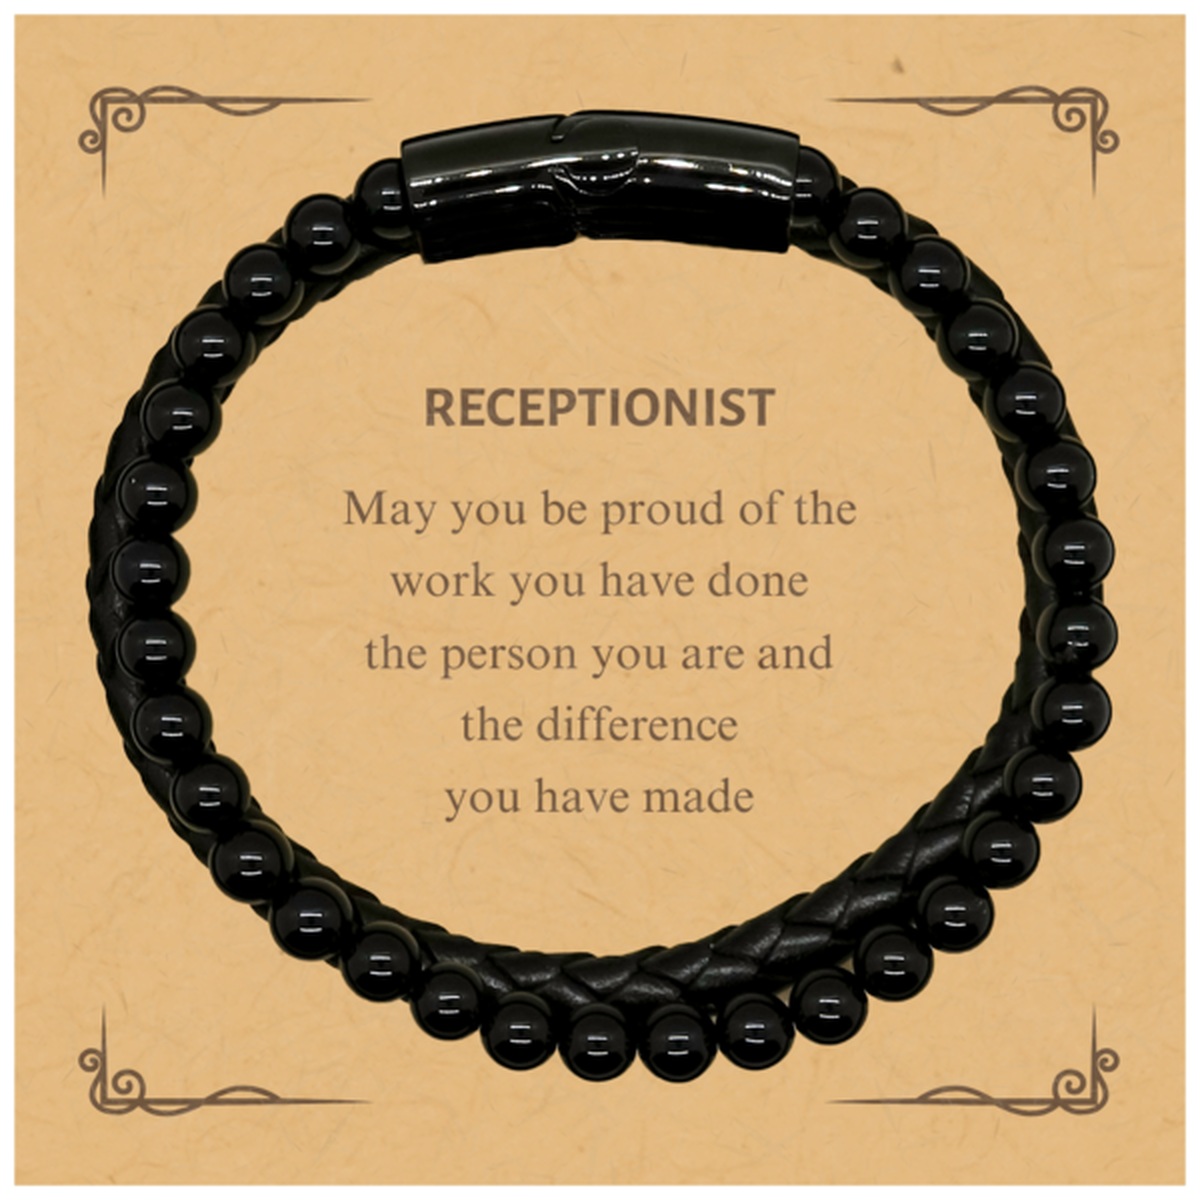 Receptionist May you be proud of the work you have done, Retirement Receptionist Stone Leather Bracelets for Colleague Appreciation Gifts Amazing for Receptionist